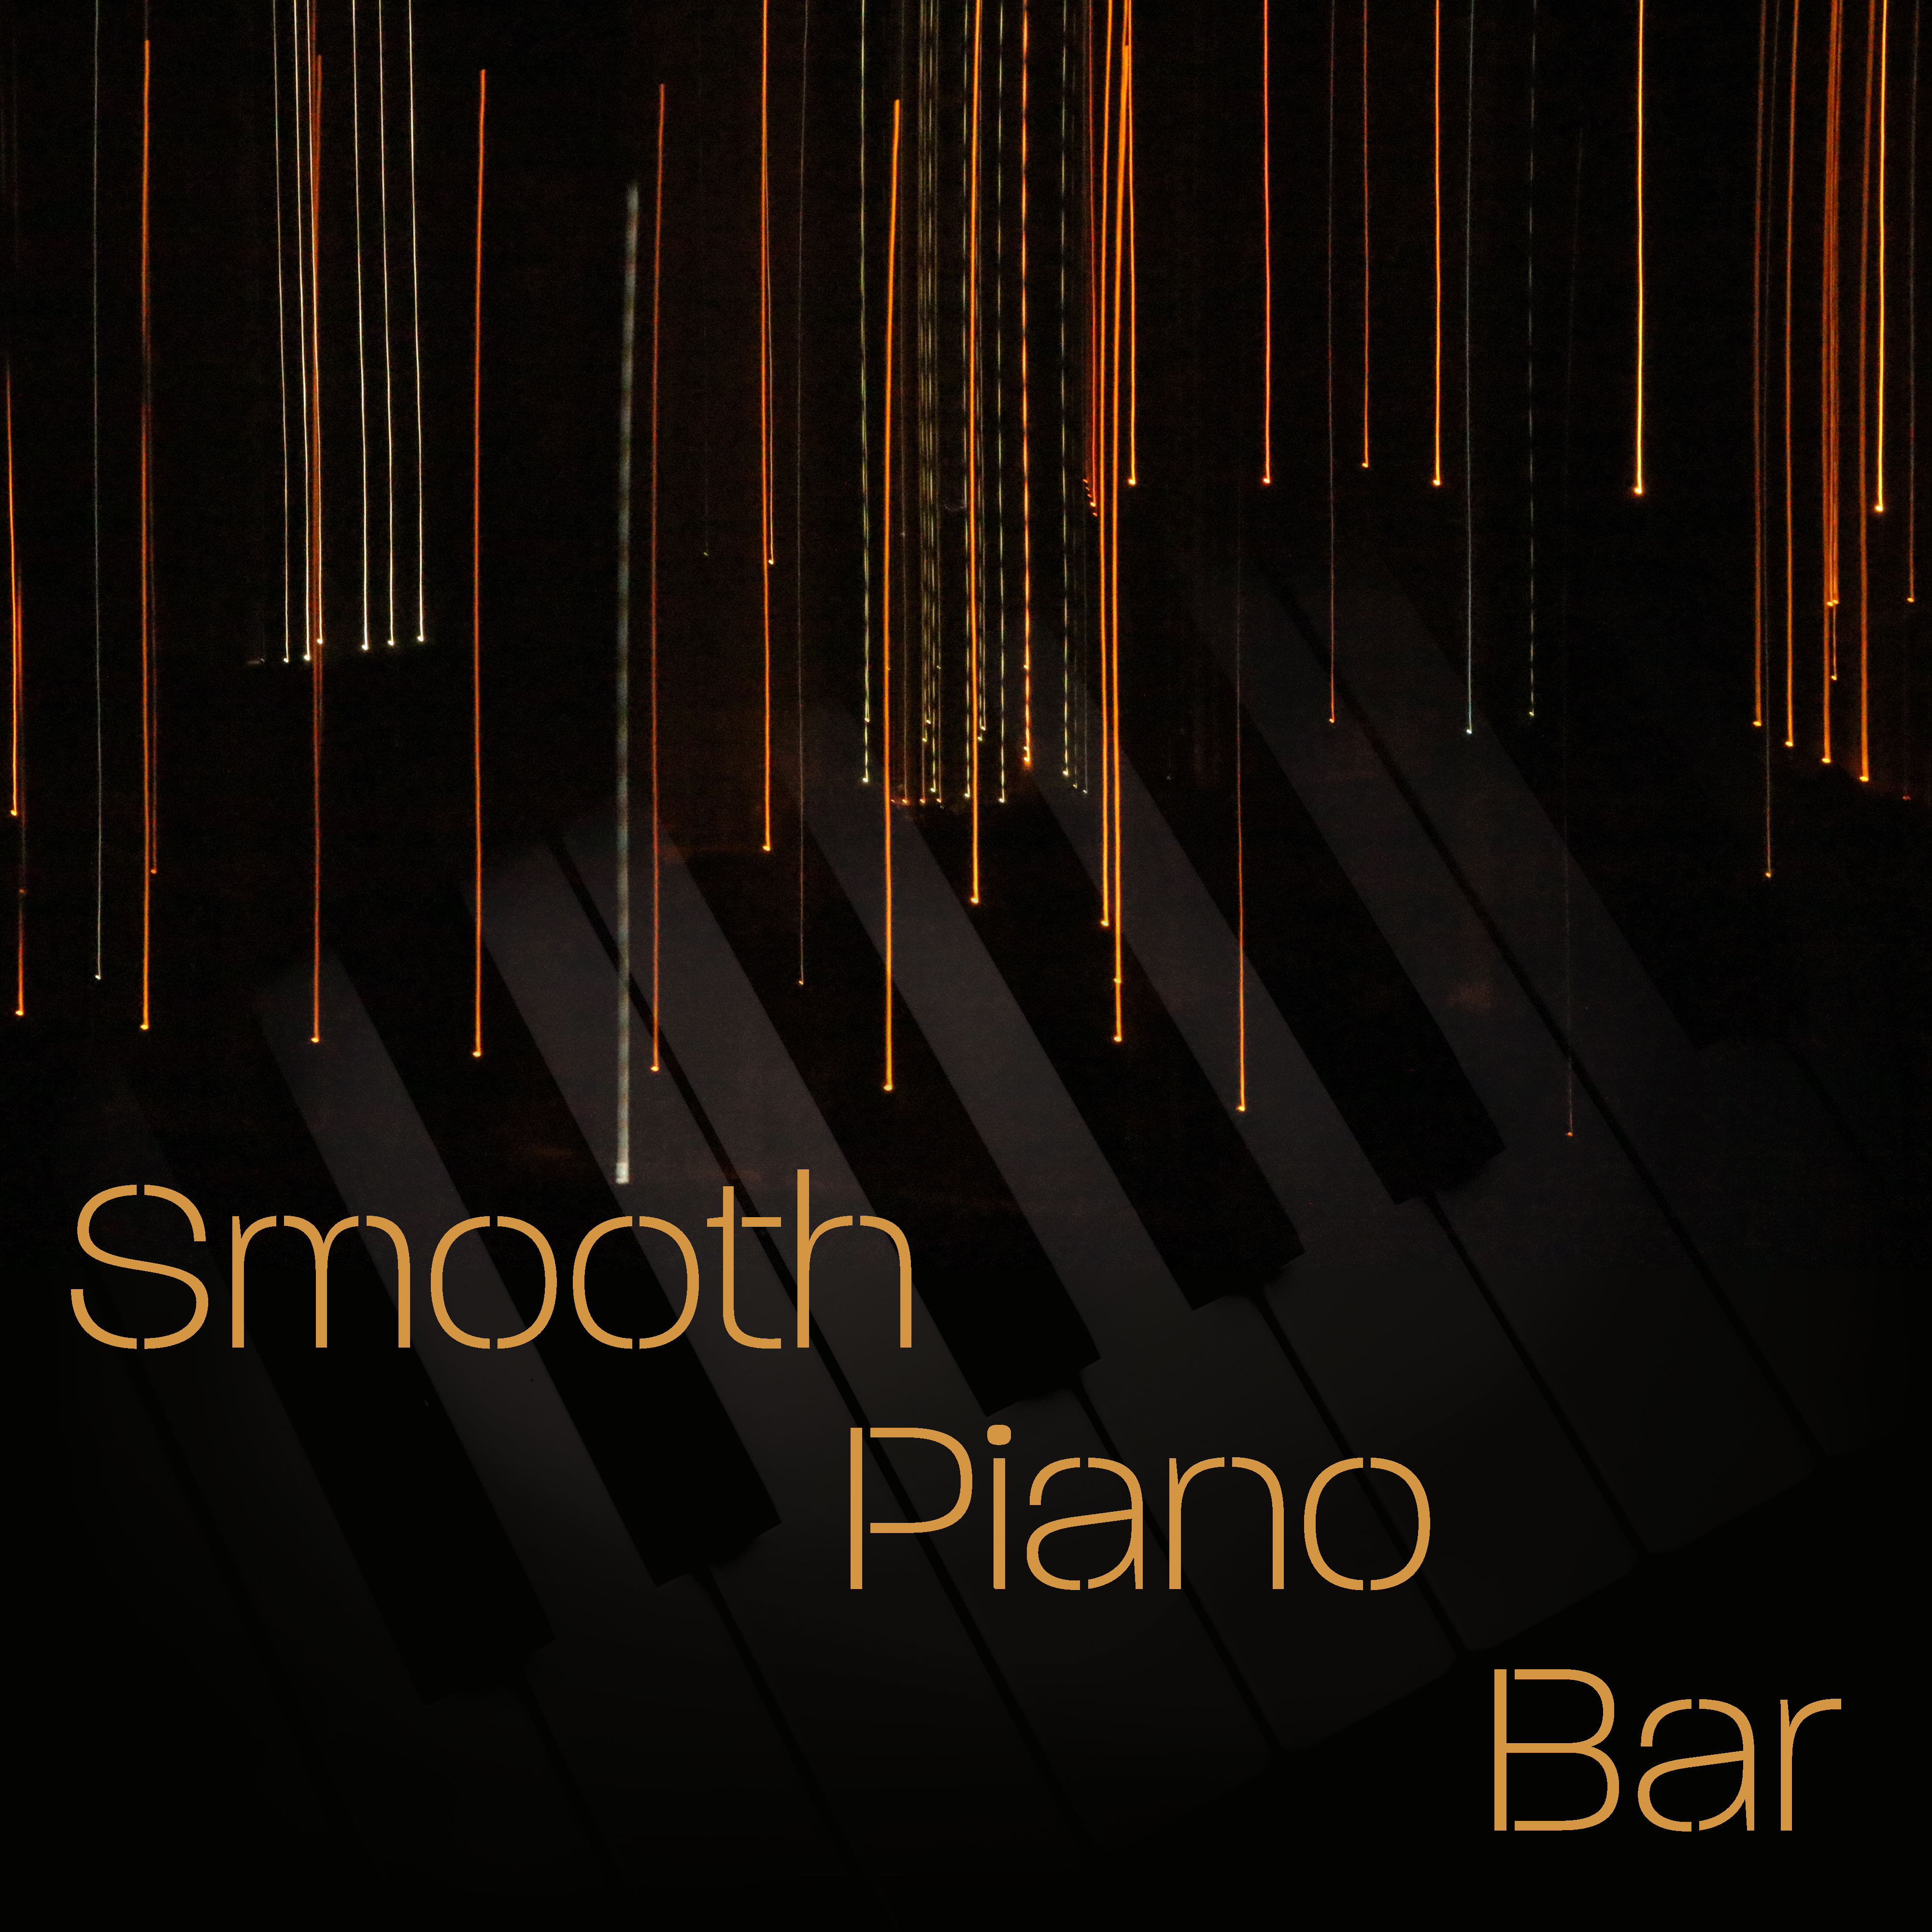 Smooth Piano Bar – Relaxed Jazz, Instrumental Music, Ambient Lounge, Piano Notes